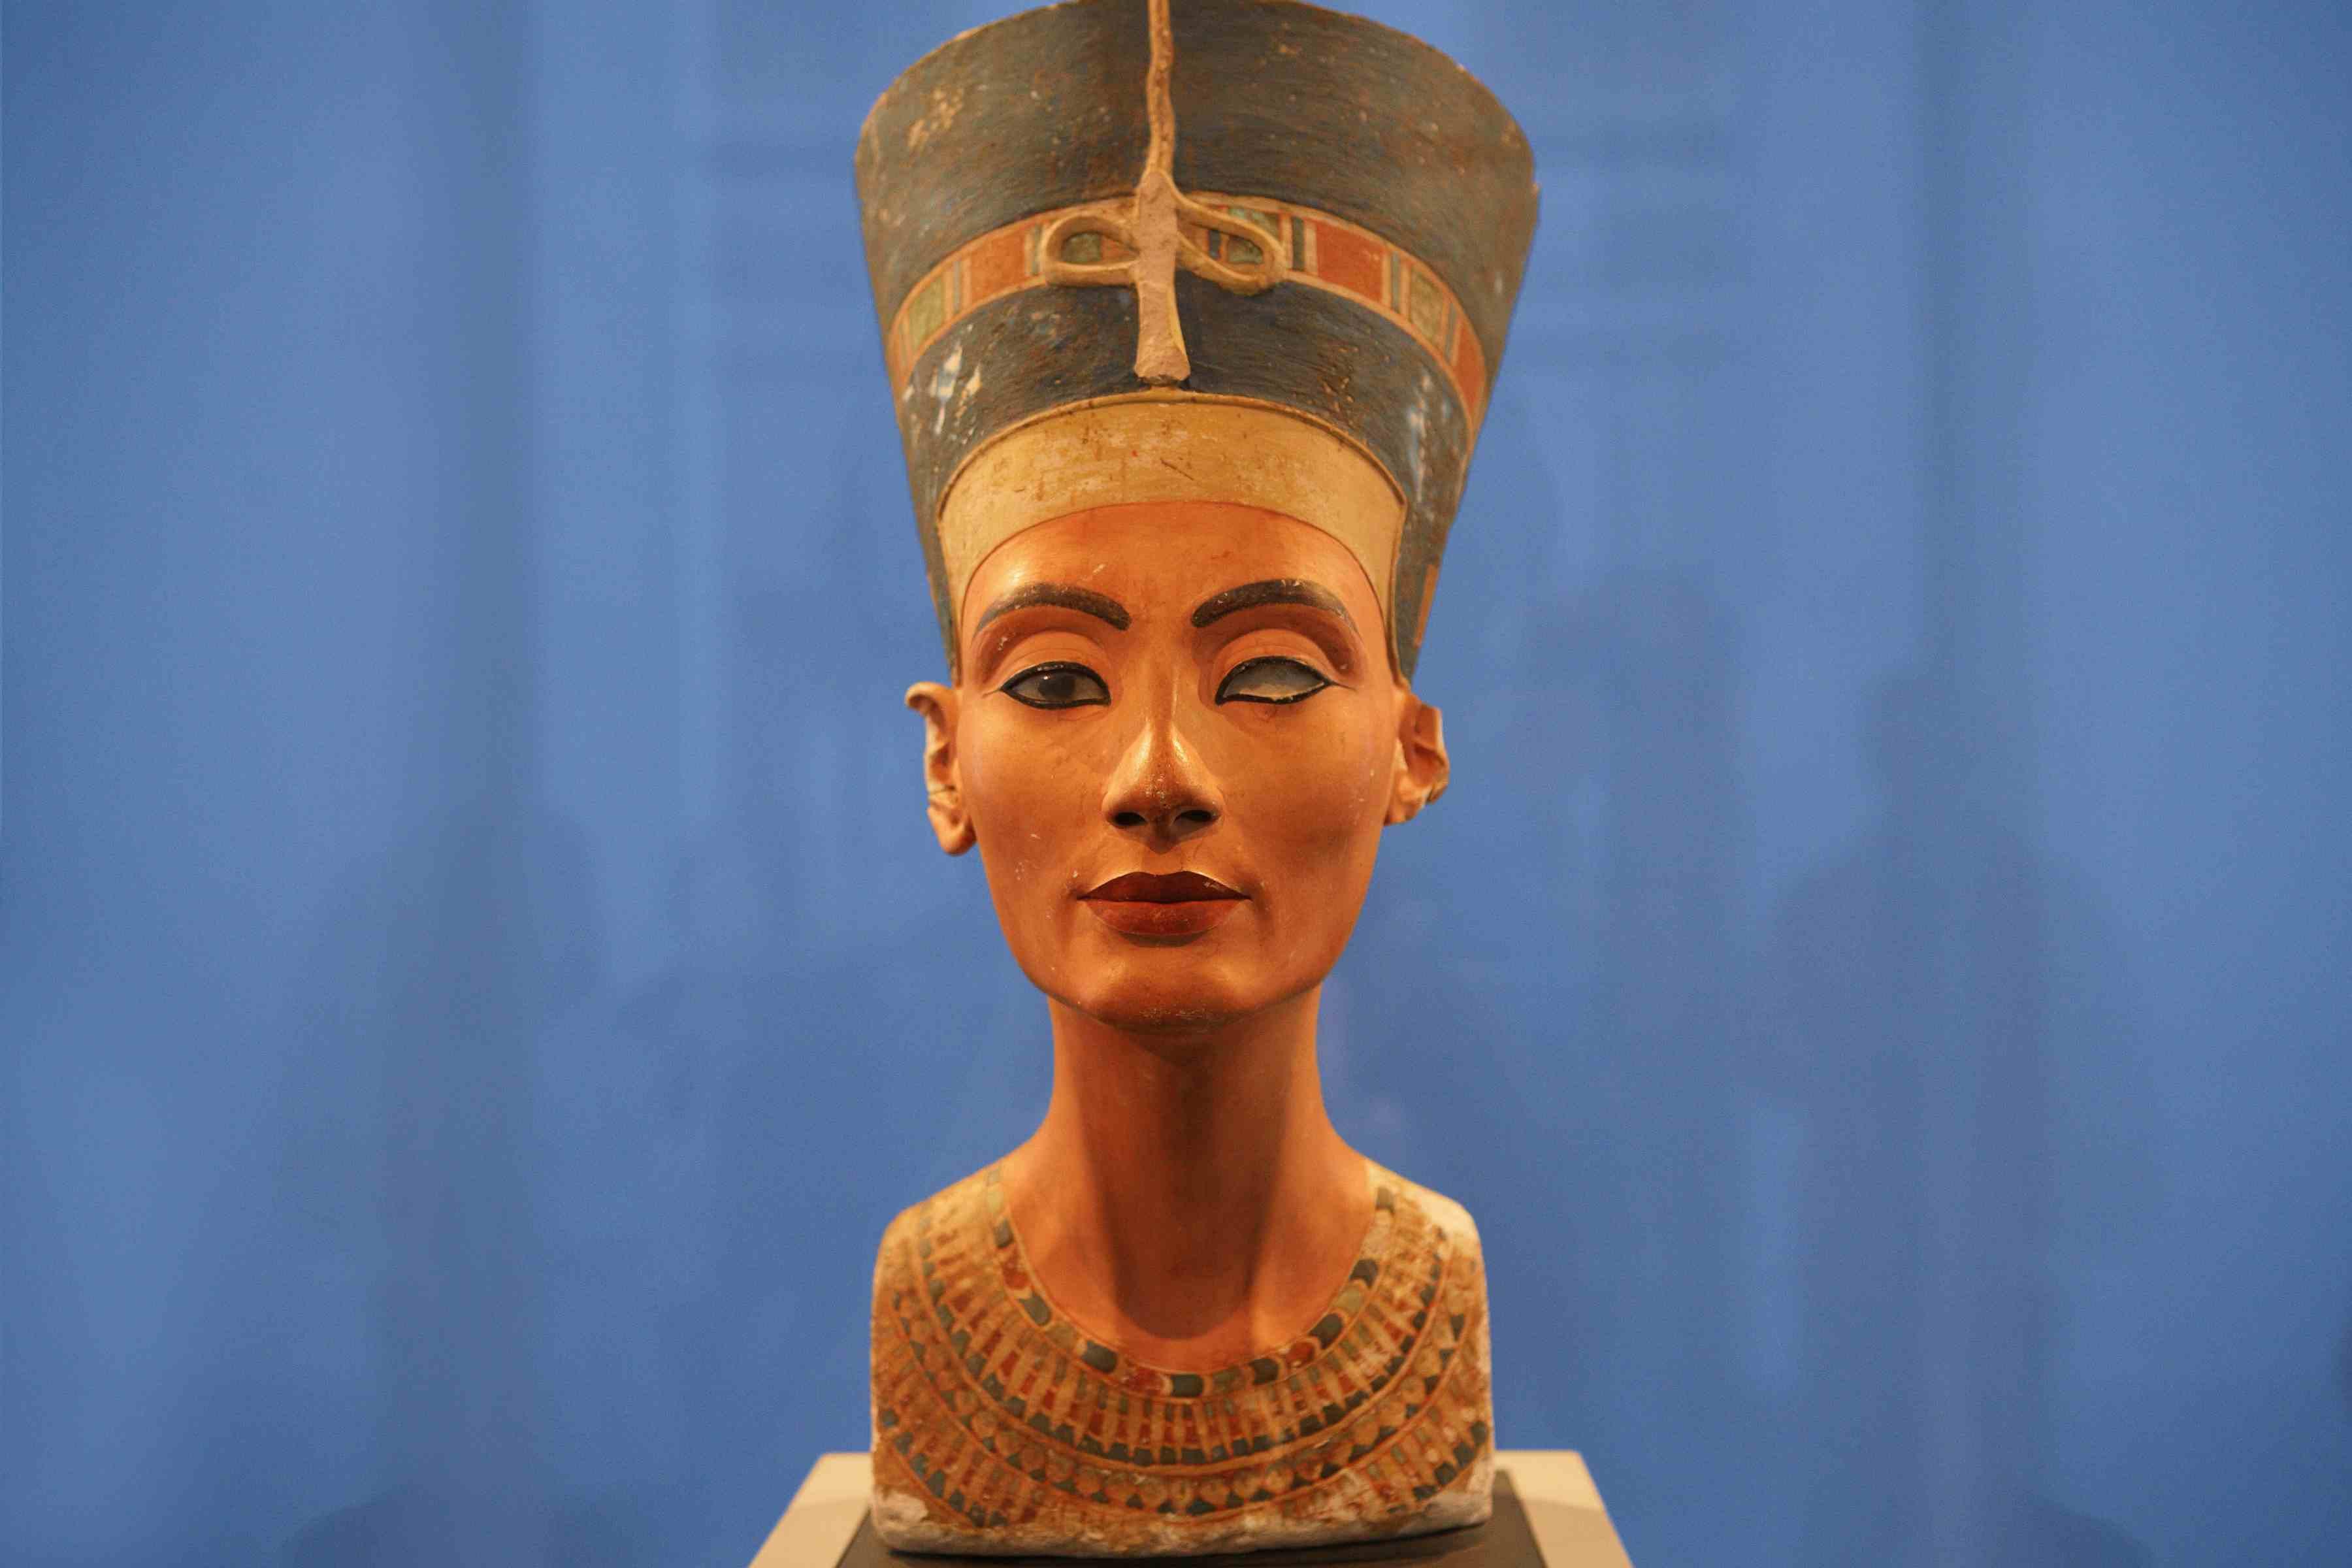 lady head vase collection of the most powerful women rulers of the ancient world within nefertiti bust in berlin